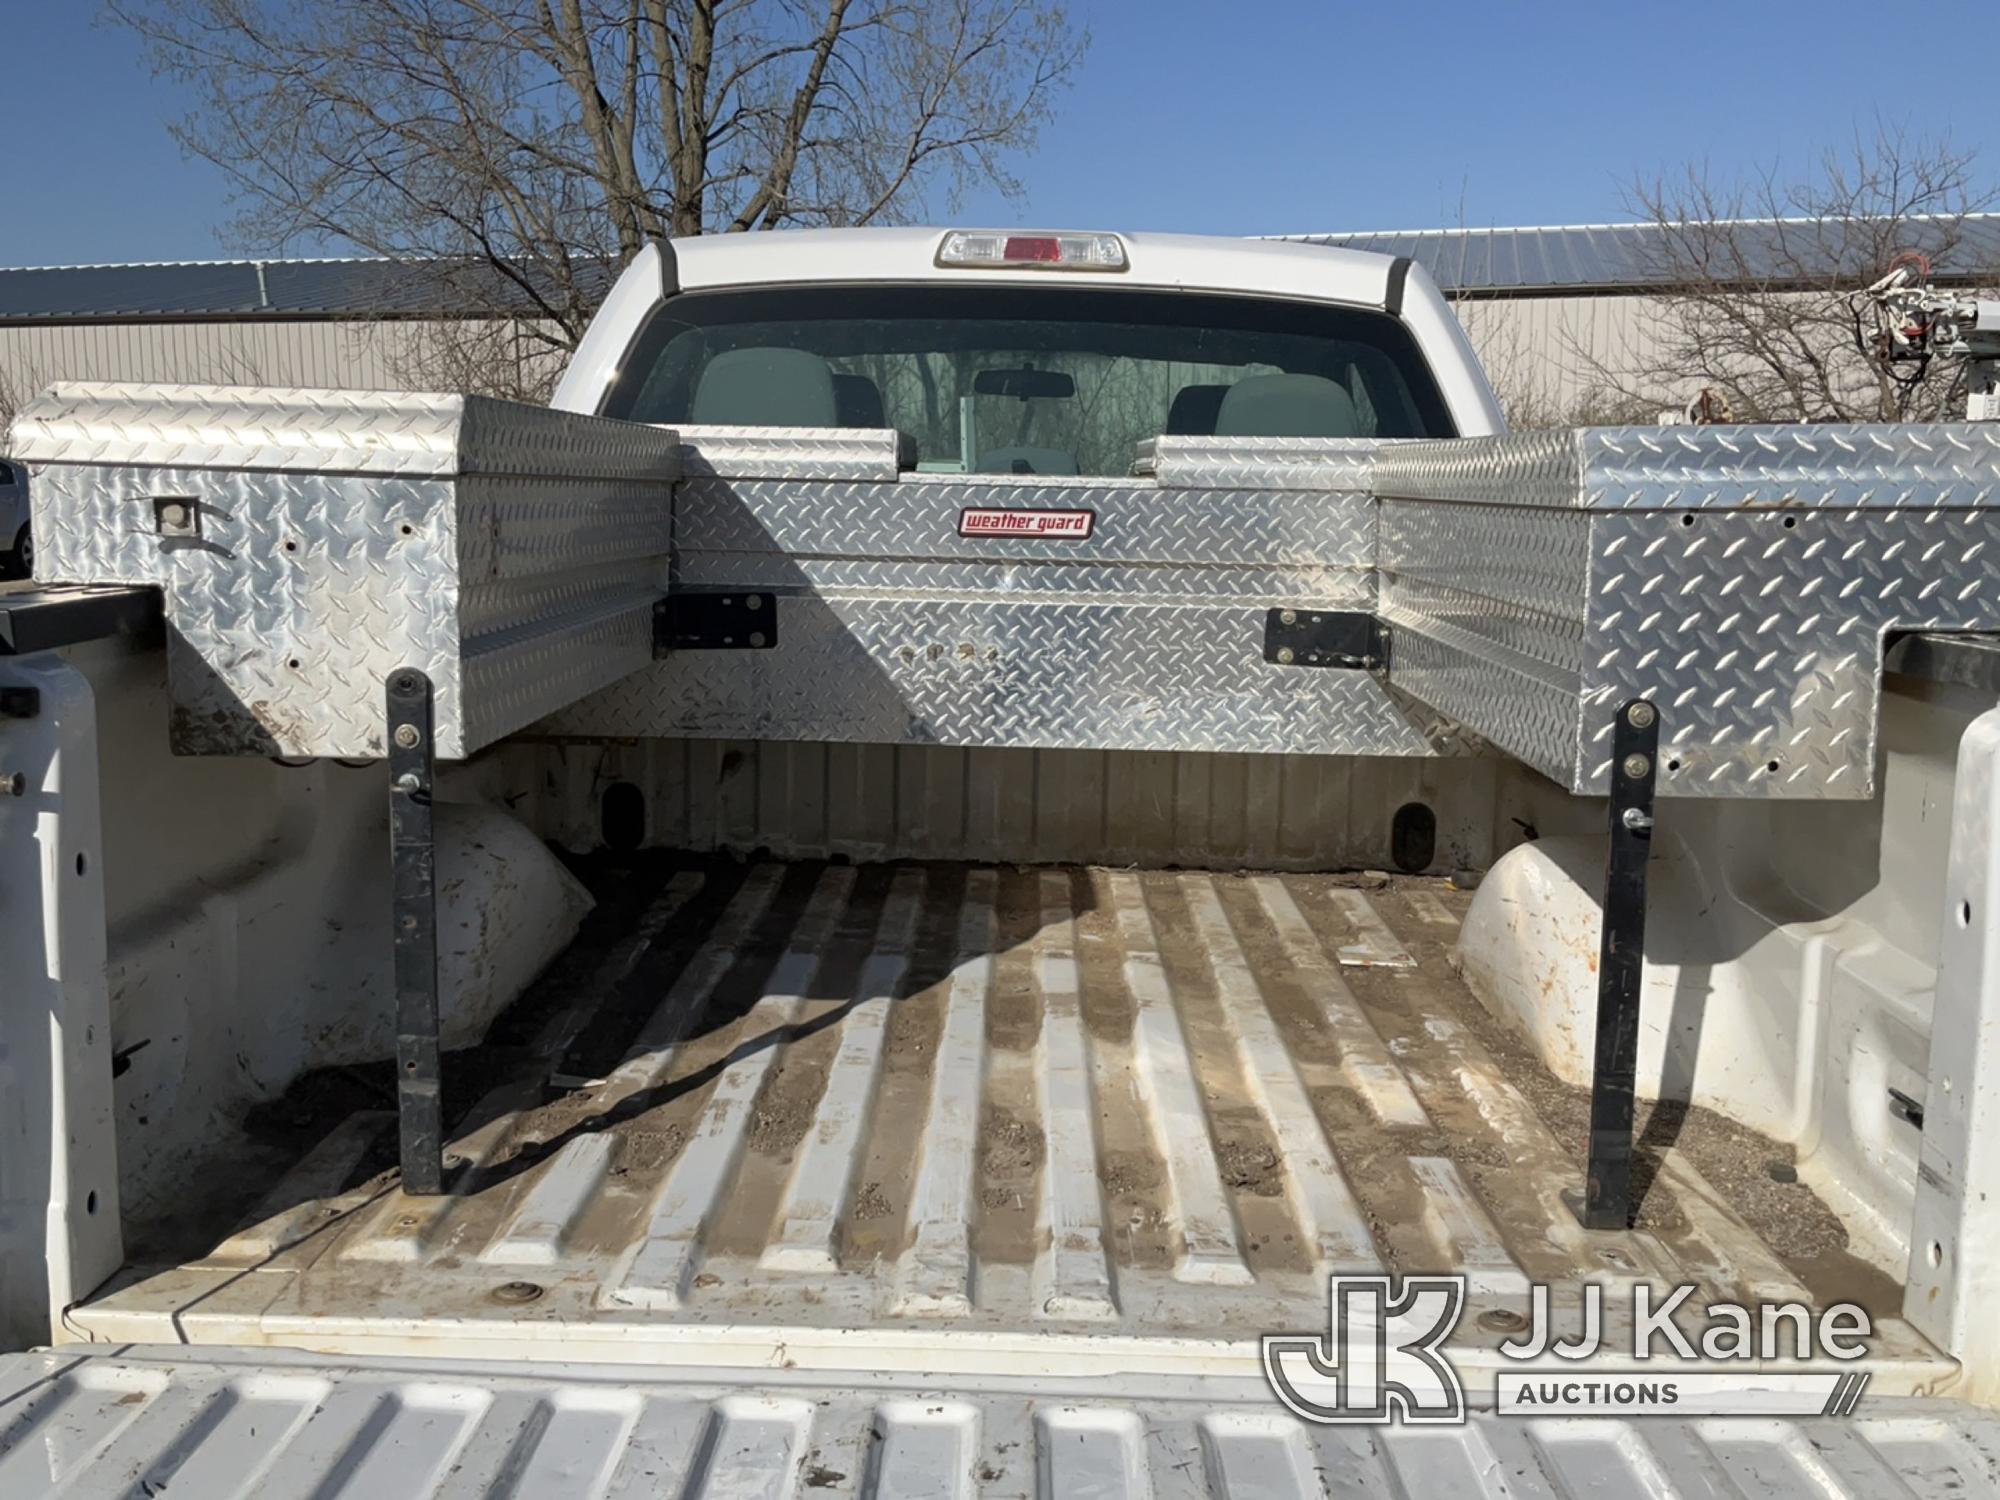 (Des Moines, IA) 2013 Ford F150 4x4 Extended-Cab Pickup Truck Runs & Moves